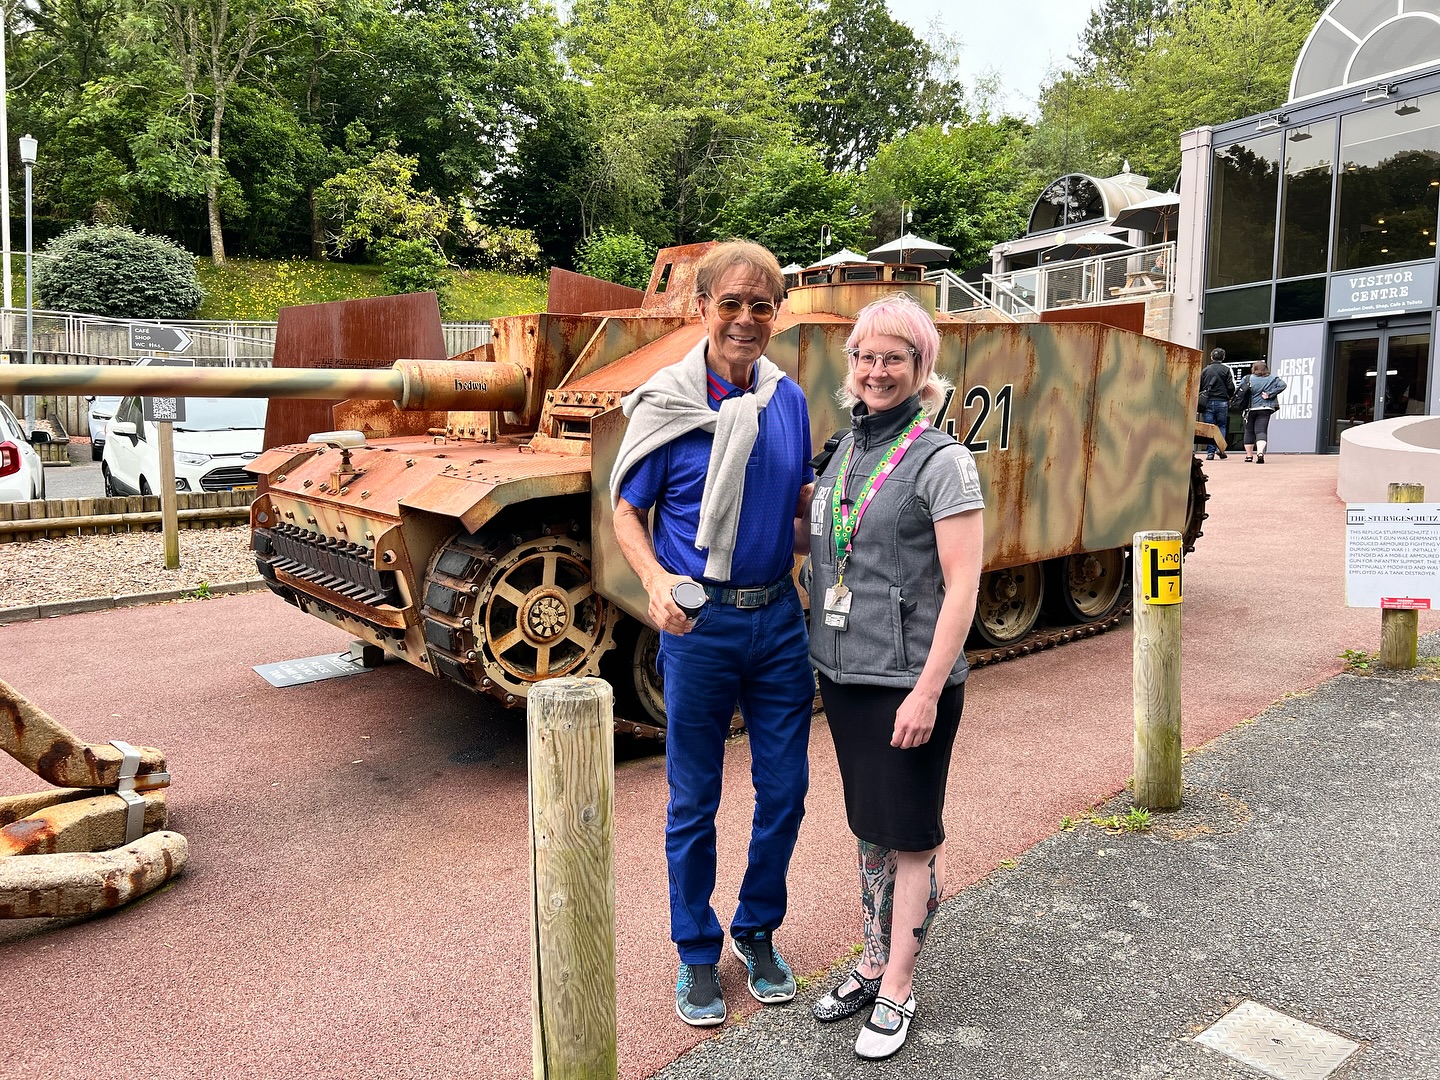 Cliff Richard, 83, enjoys a summer holiday in Jersey, visiting history museums and dining at local restaurants. Fans thrilled by his casual and charming presence.